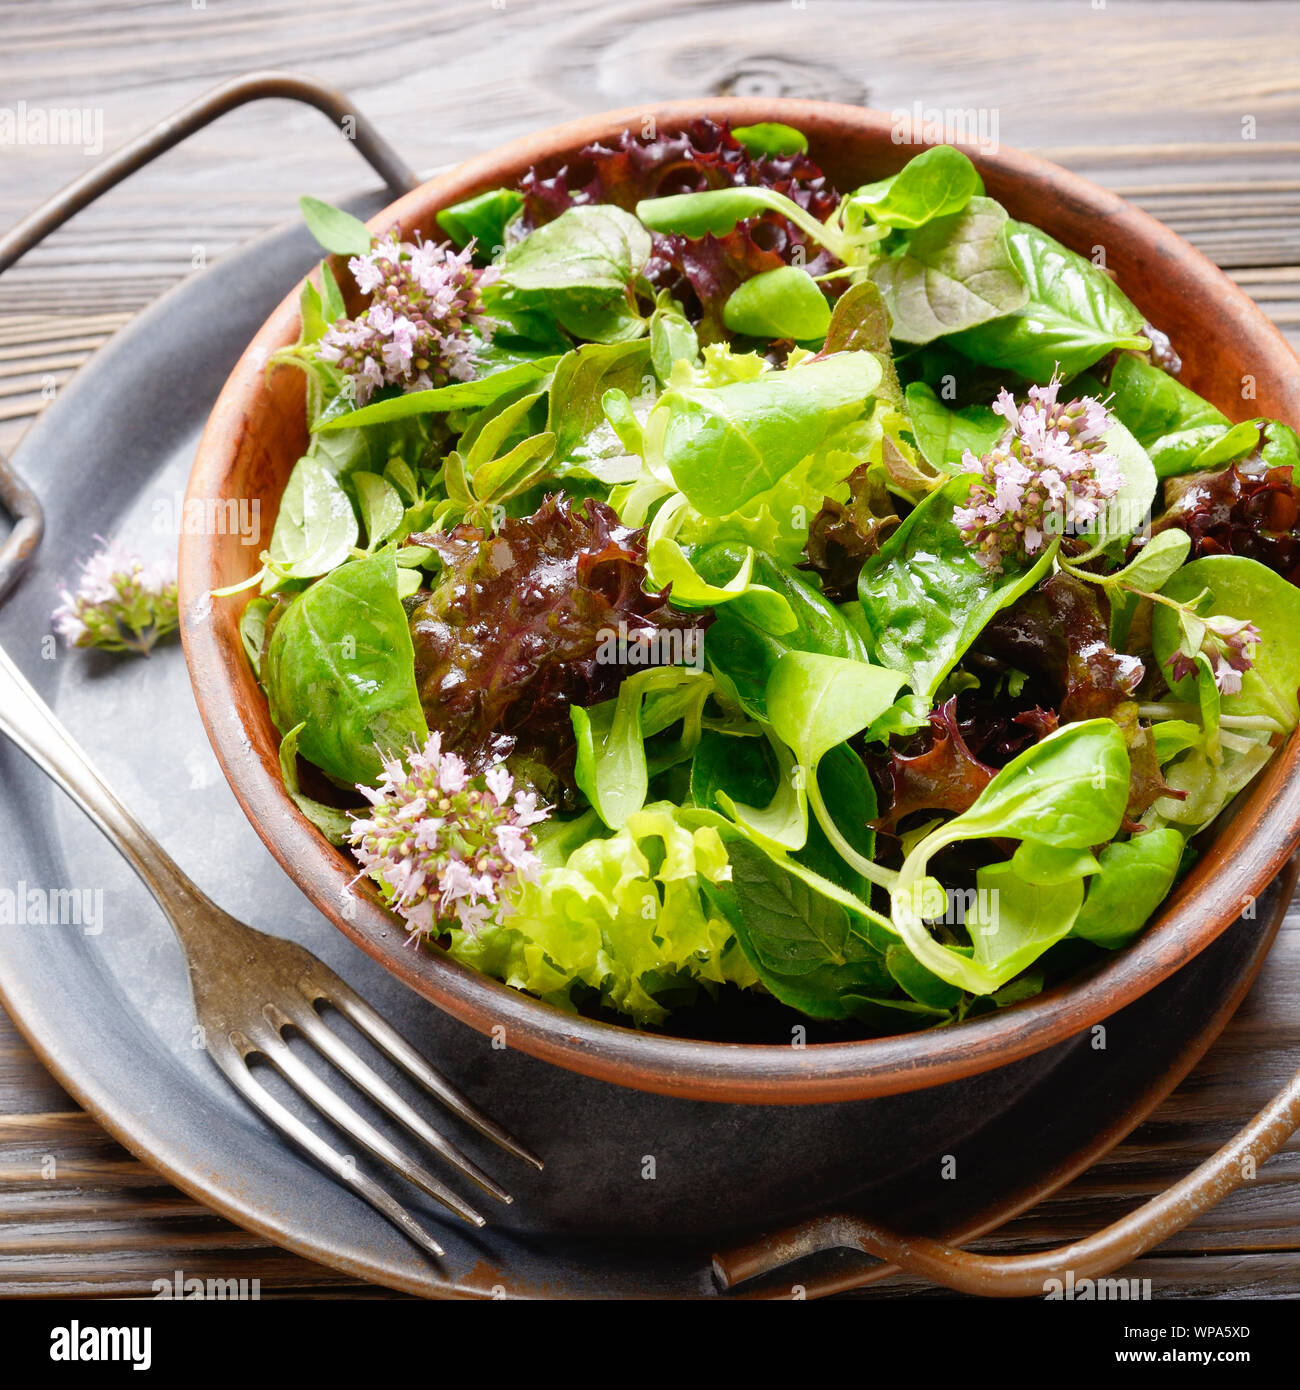 Clay dish with green and violet lettuce, lamb's lettuce salad with oregano flowers on vintage metal tray. Fork aside Stock Photo